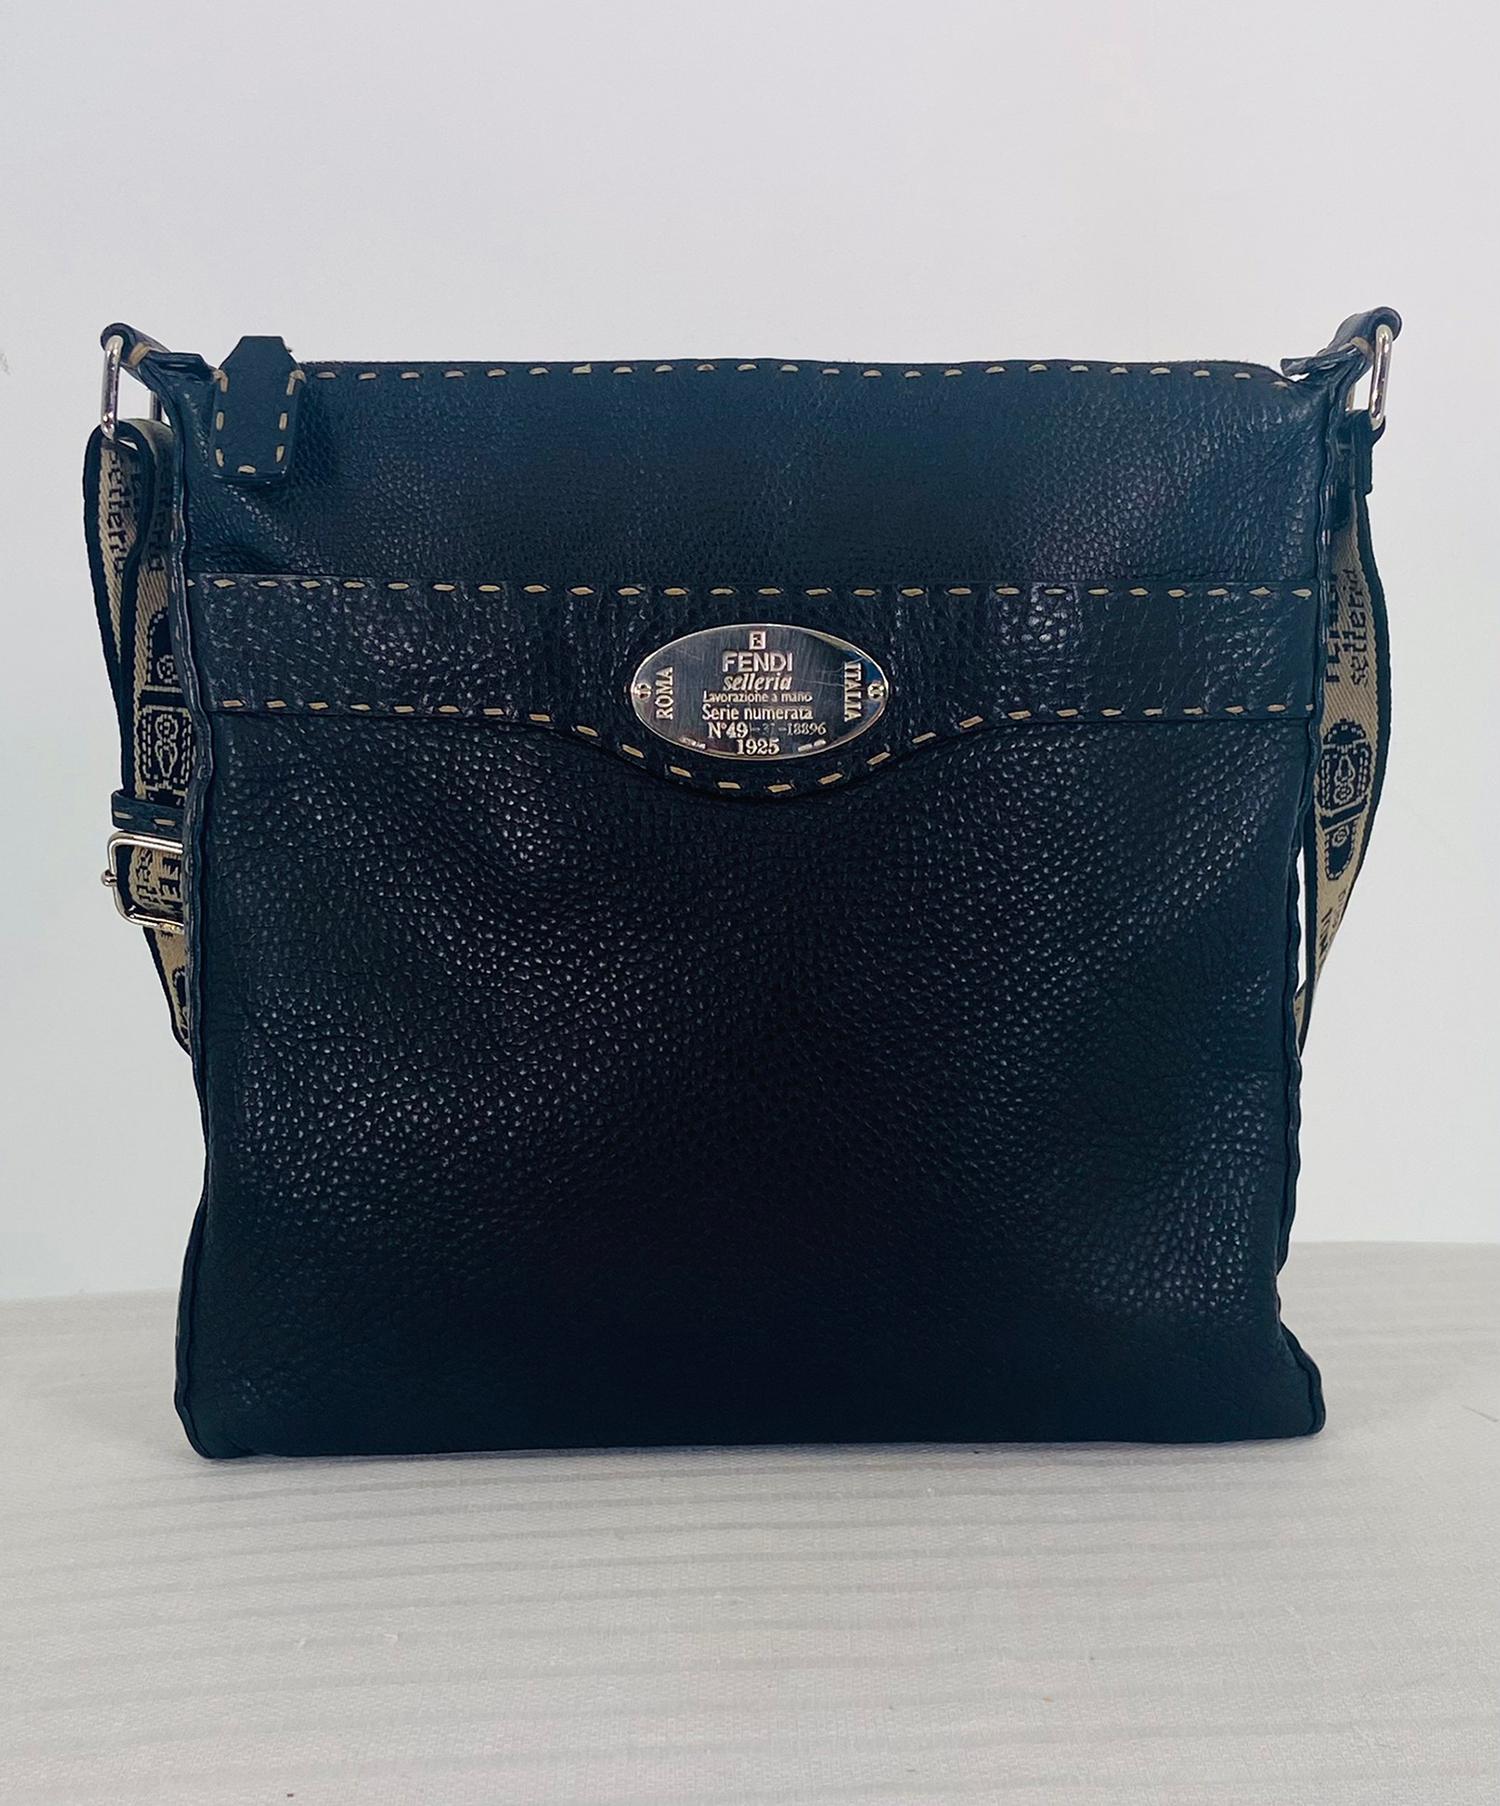 The rare and collectable FENDI selleria black leather cross body bag with logo canvas strap. Supple pebble leather body with the silver Selleria numbered tab has off white saddle stitching. The bag features a main zipped compartment that has a